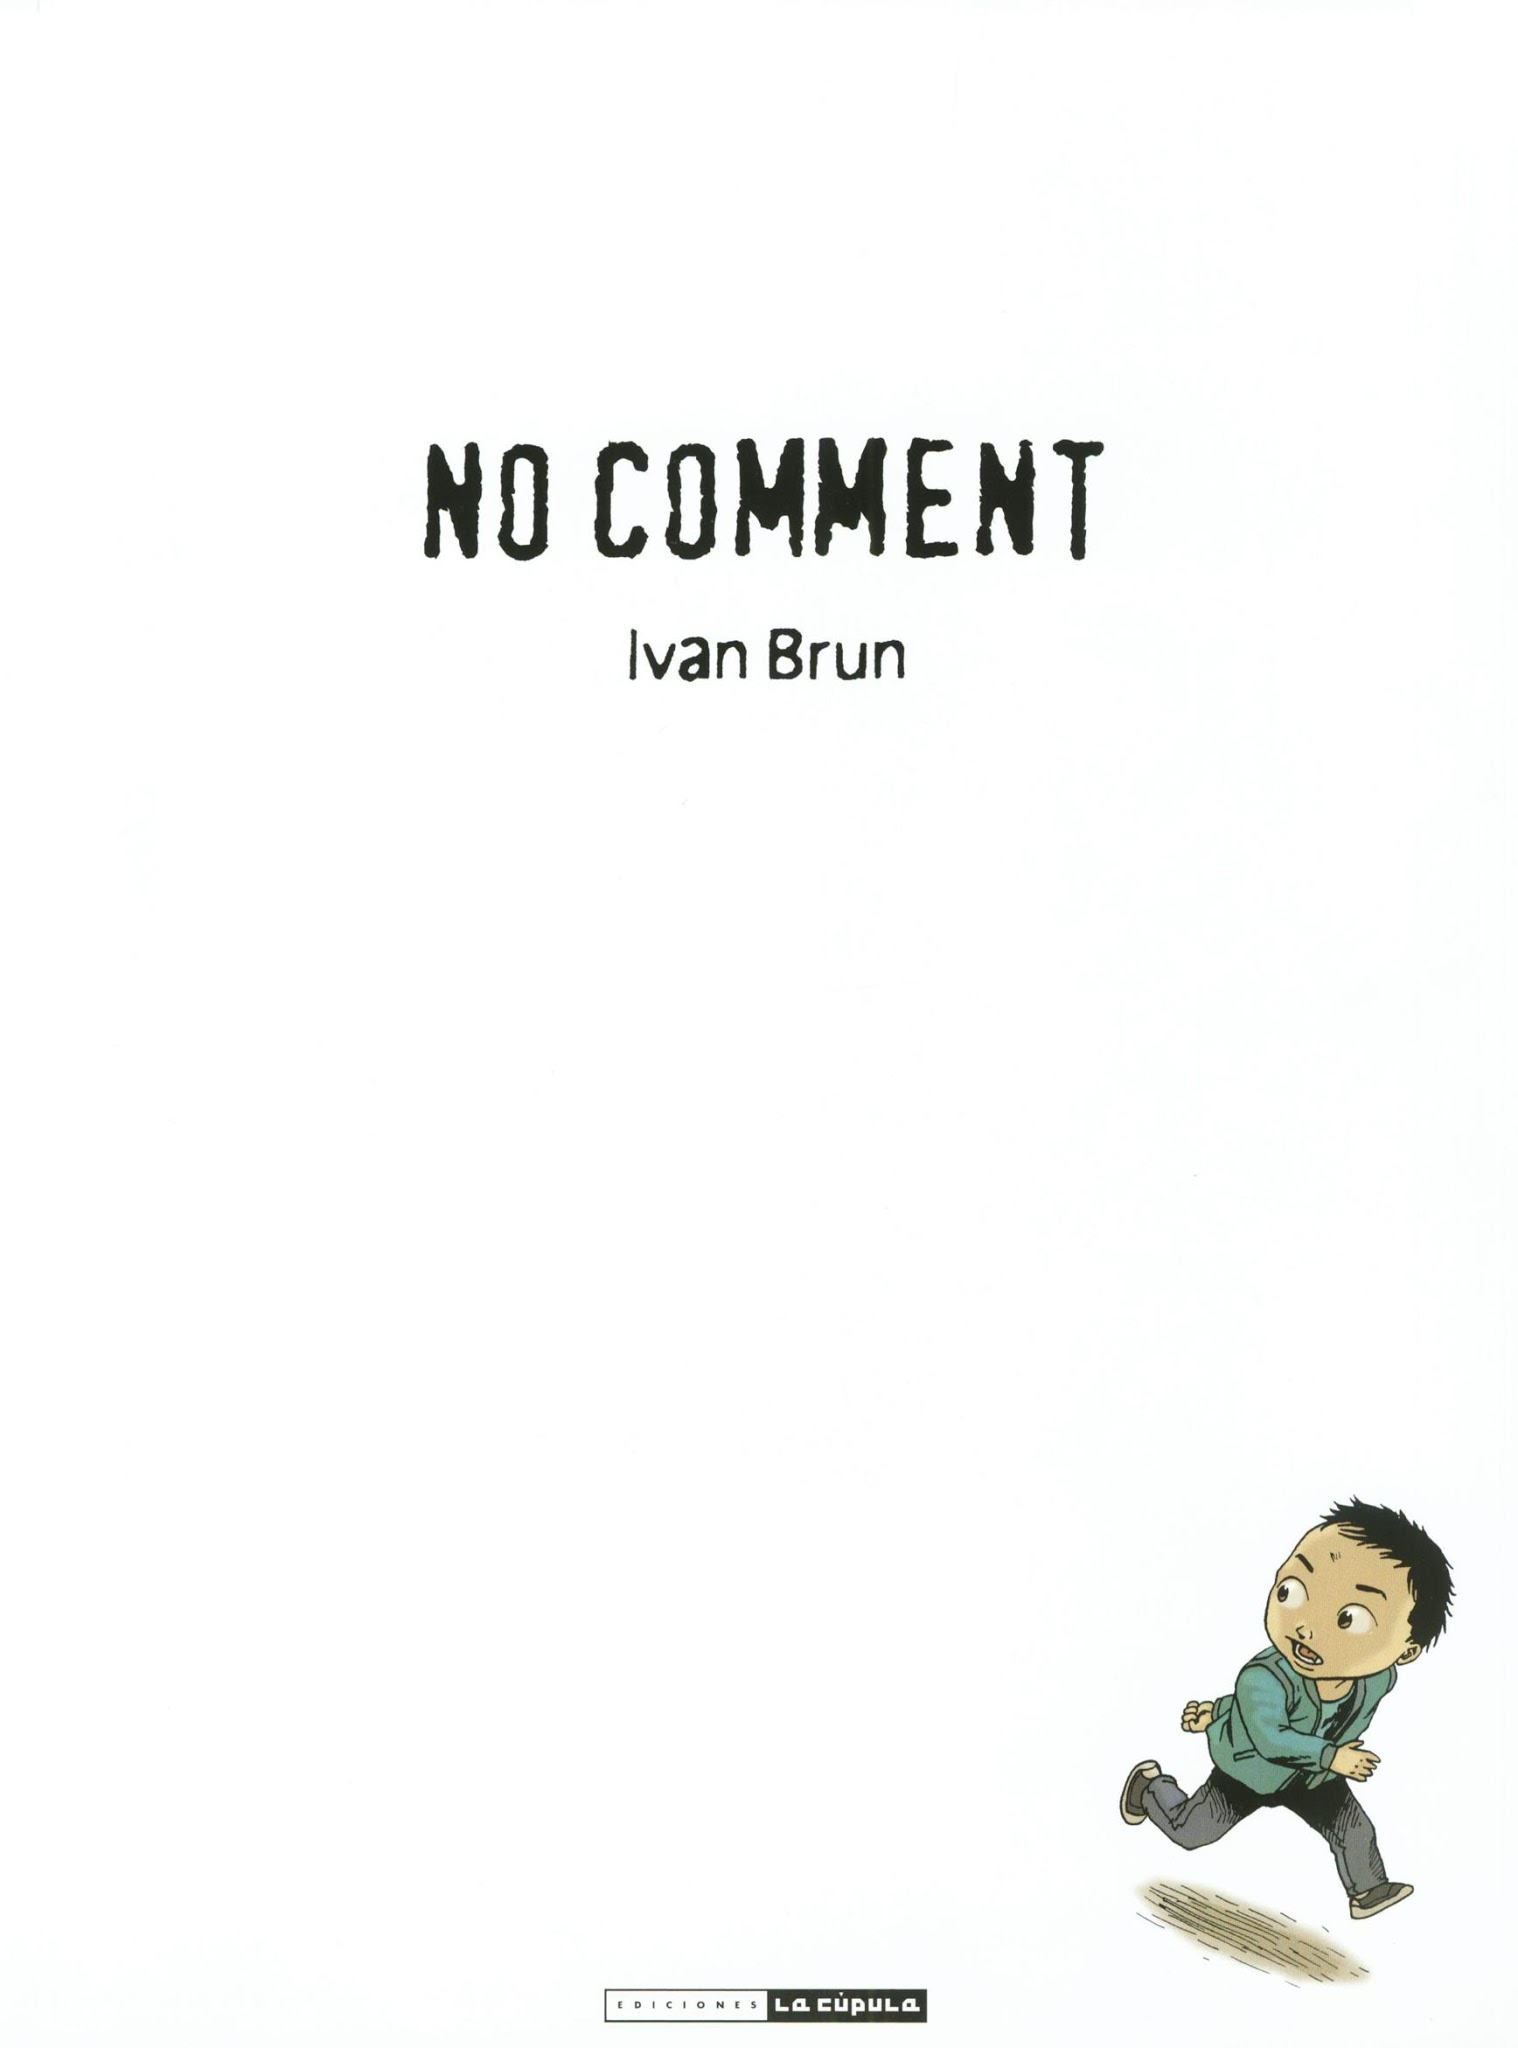 Read online No comment comic -  Issue # TPB - 3